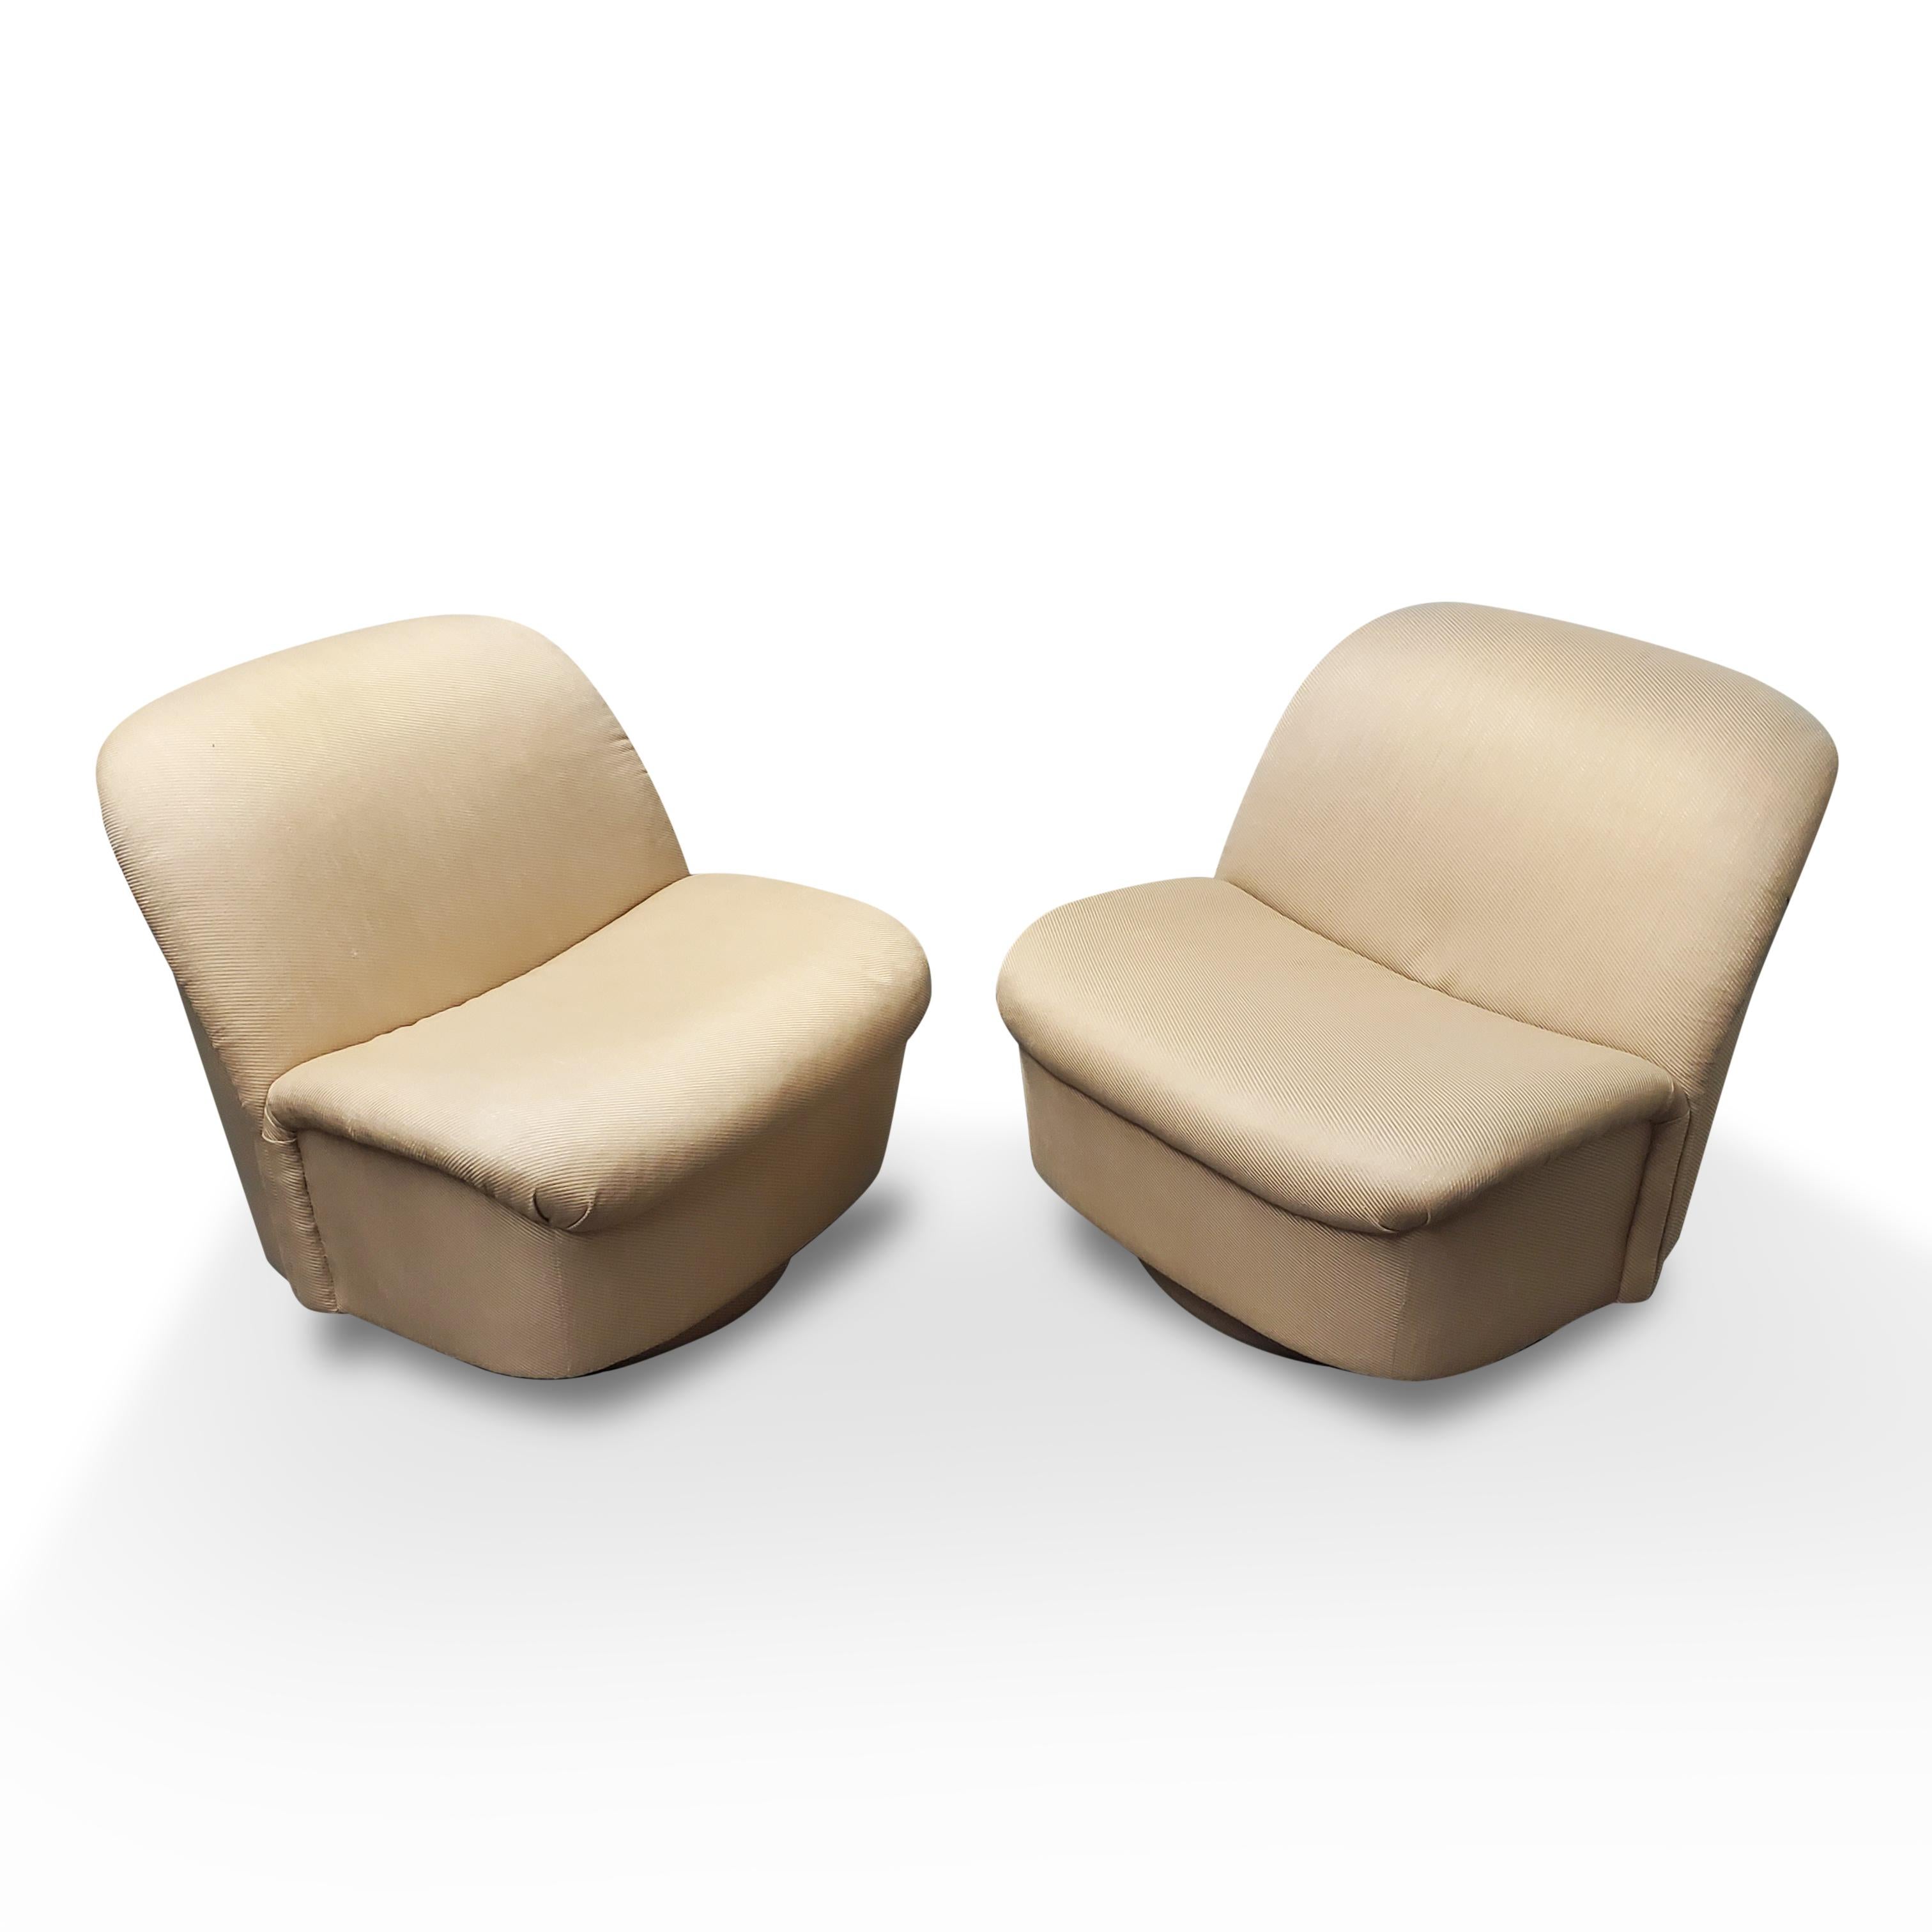 Pair of Signed Directional Swivel / Tilt Lounge Chairs 1